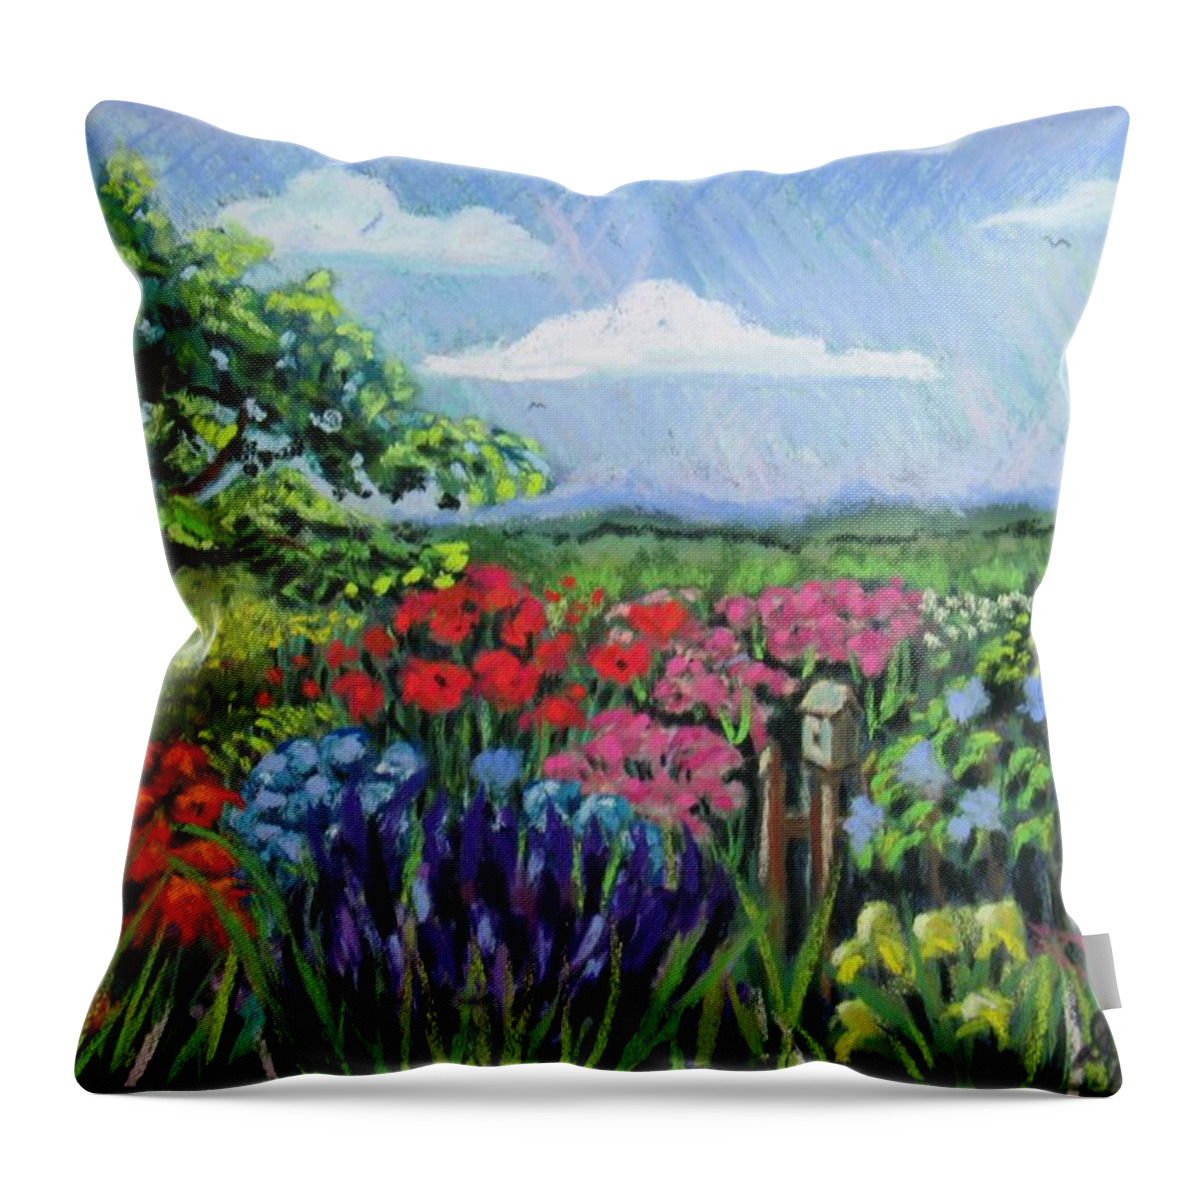 Landscape Throw Pillow featuring the painting Goshen Garden by Donna Chambers